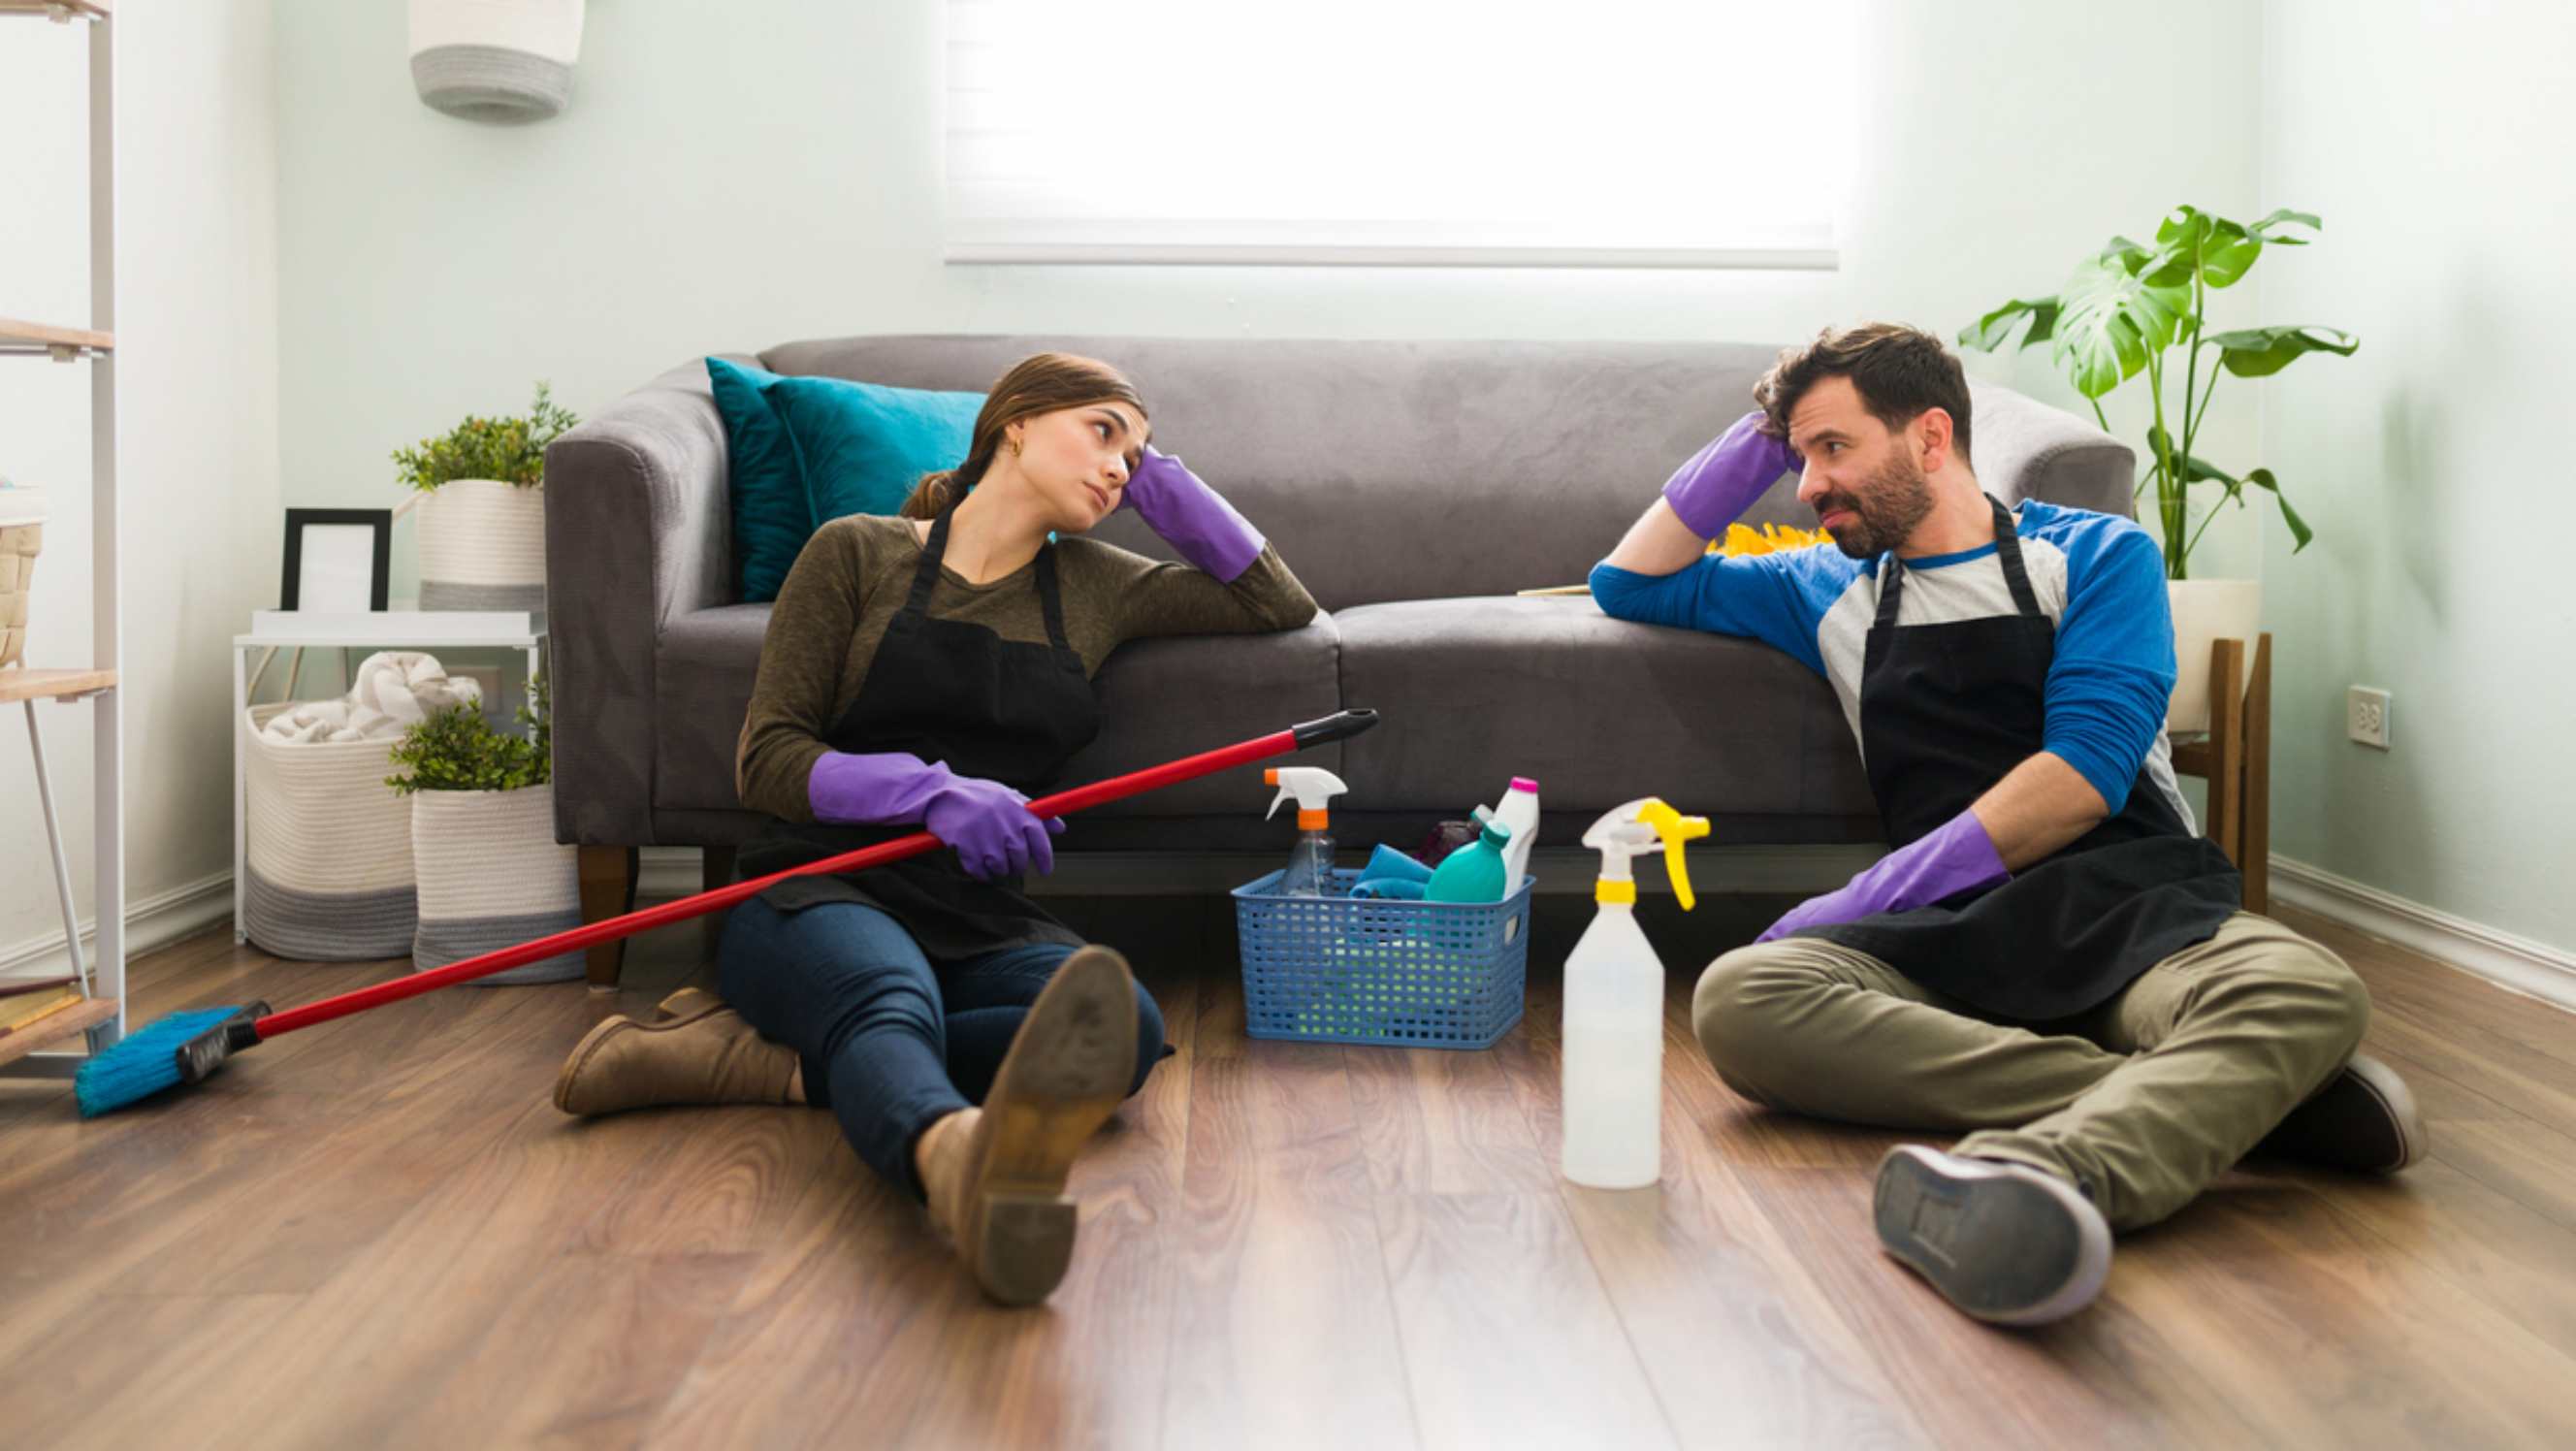 Housekeeper vs. cleaner - A housekeeper and a cleaner sitting on the floor